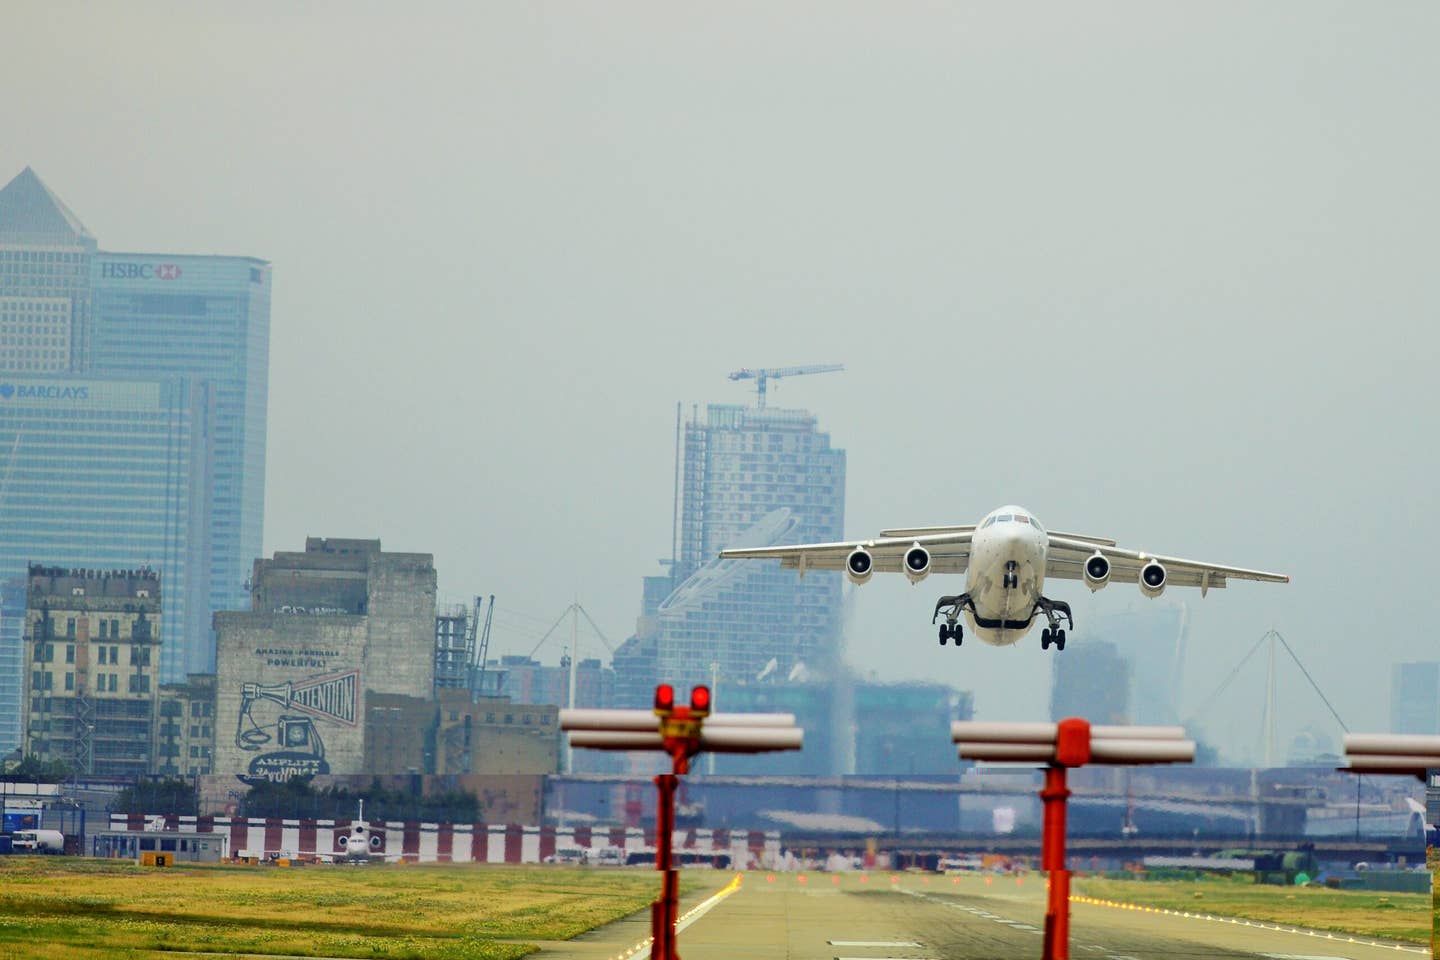 One of the few STOL-capable regional jets to have found market was the Avro RJ series. This CityJet Avro RJ85 is seen taking off from London City Airport in August 2015. <em>Aleem Yousaf/Wikimedia Commons</em>